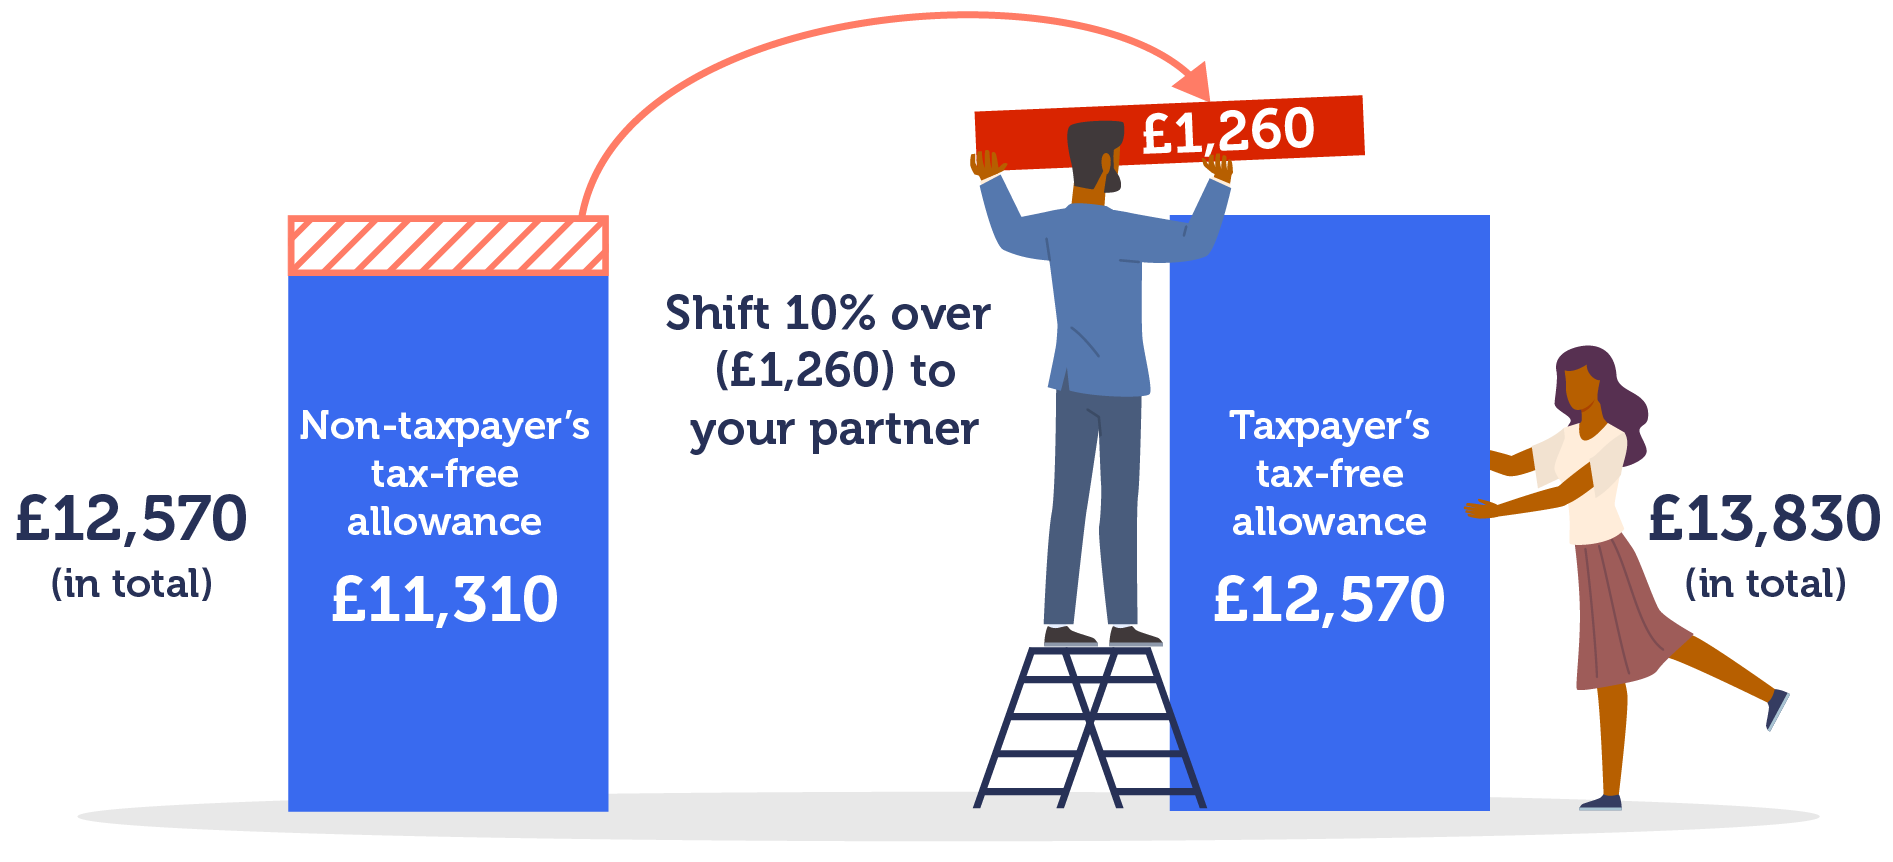 An image detailing how non-taxpayers can transfer part of their tax-free allowance to their spouse. A non-taxpayer can shift 10% or £1,260 of their £12,570 tax-free allowance over to their taxpayer spouse, reducing their allowance to £11,310. However, this would increase the taxpayer's allowance to £13,830. Image links to our Marriage tax allowance guide.